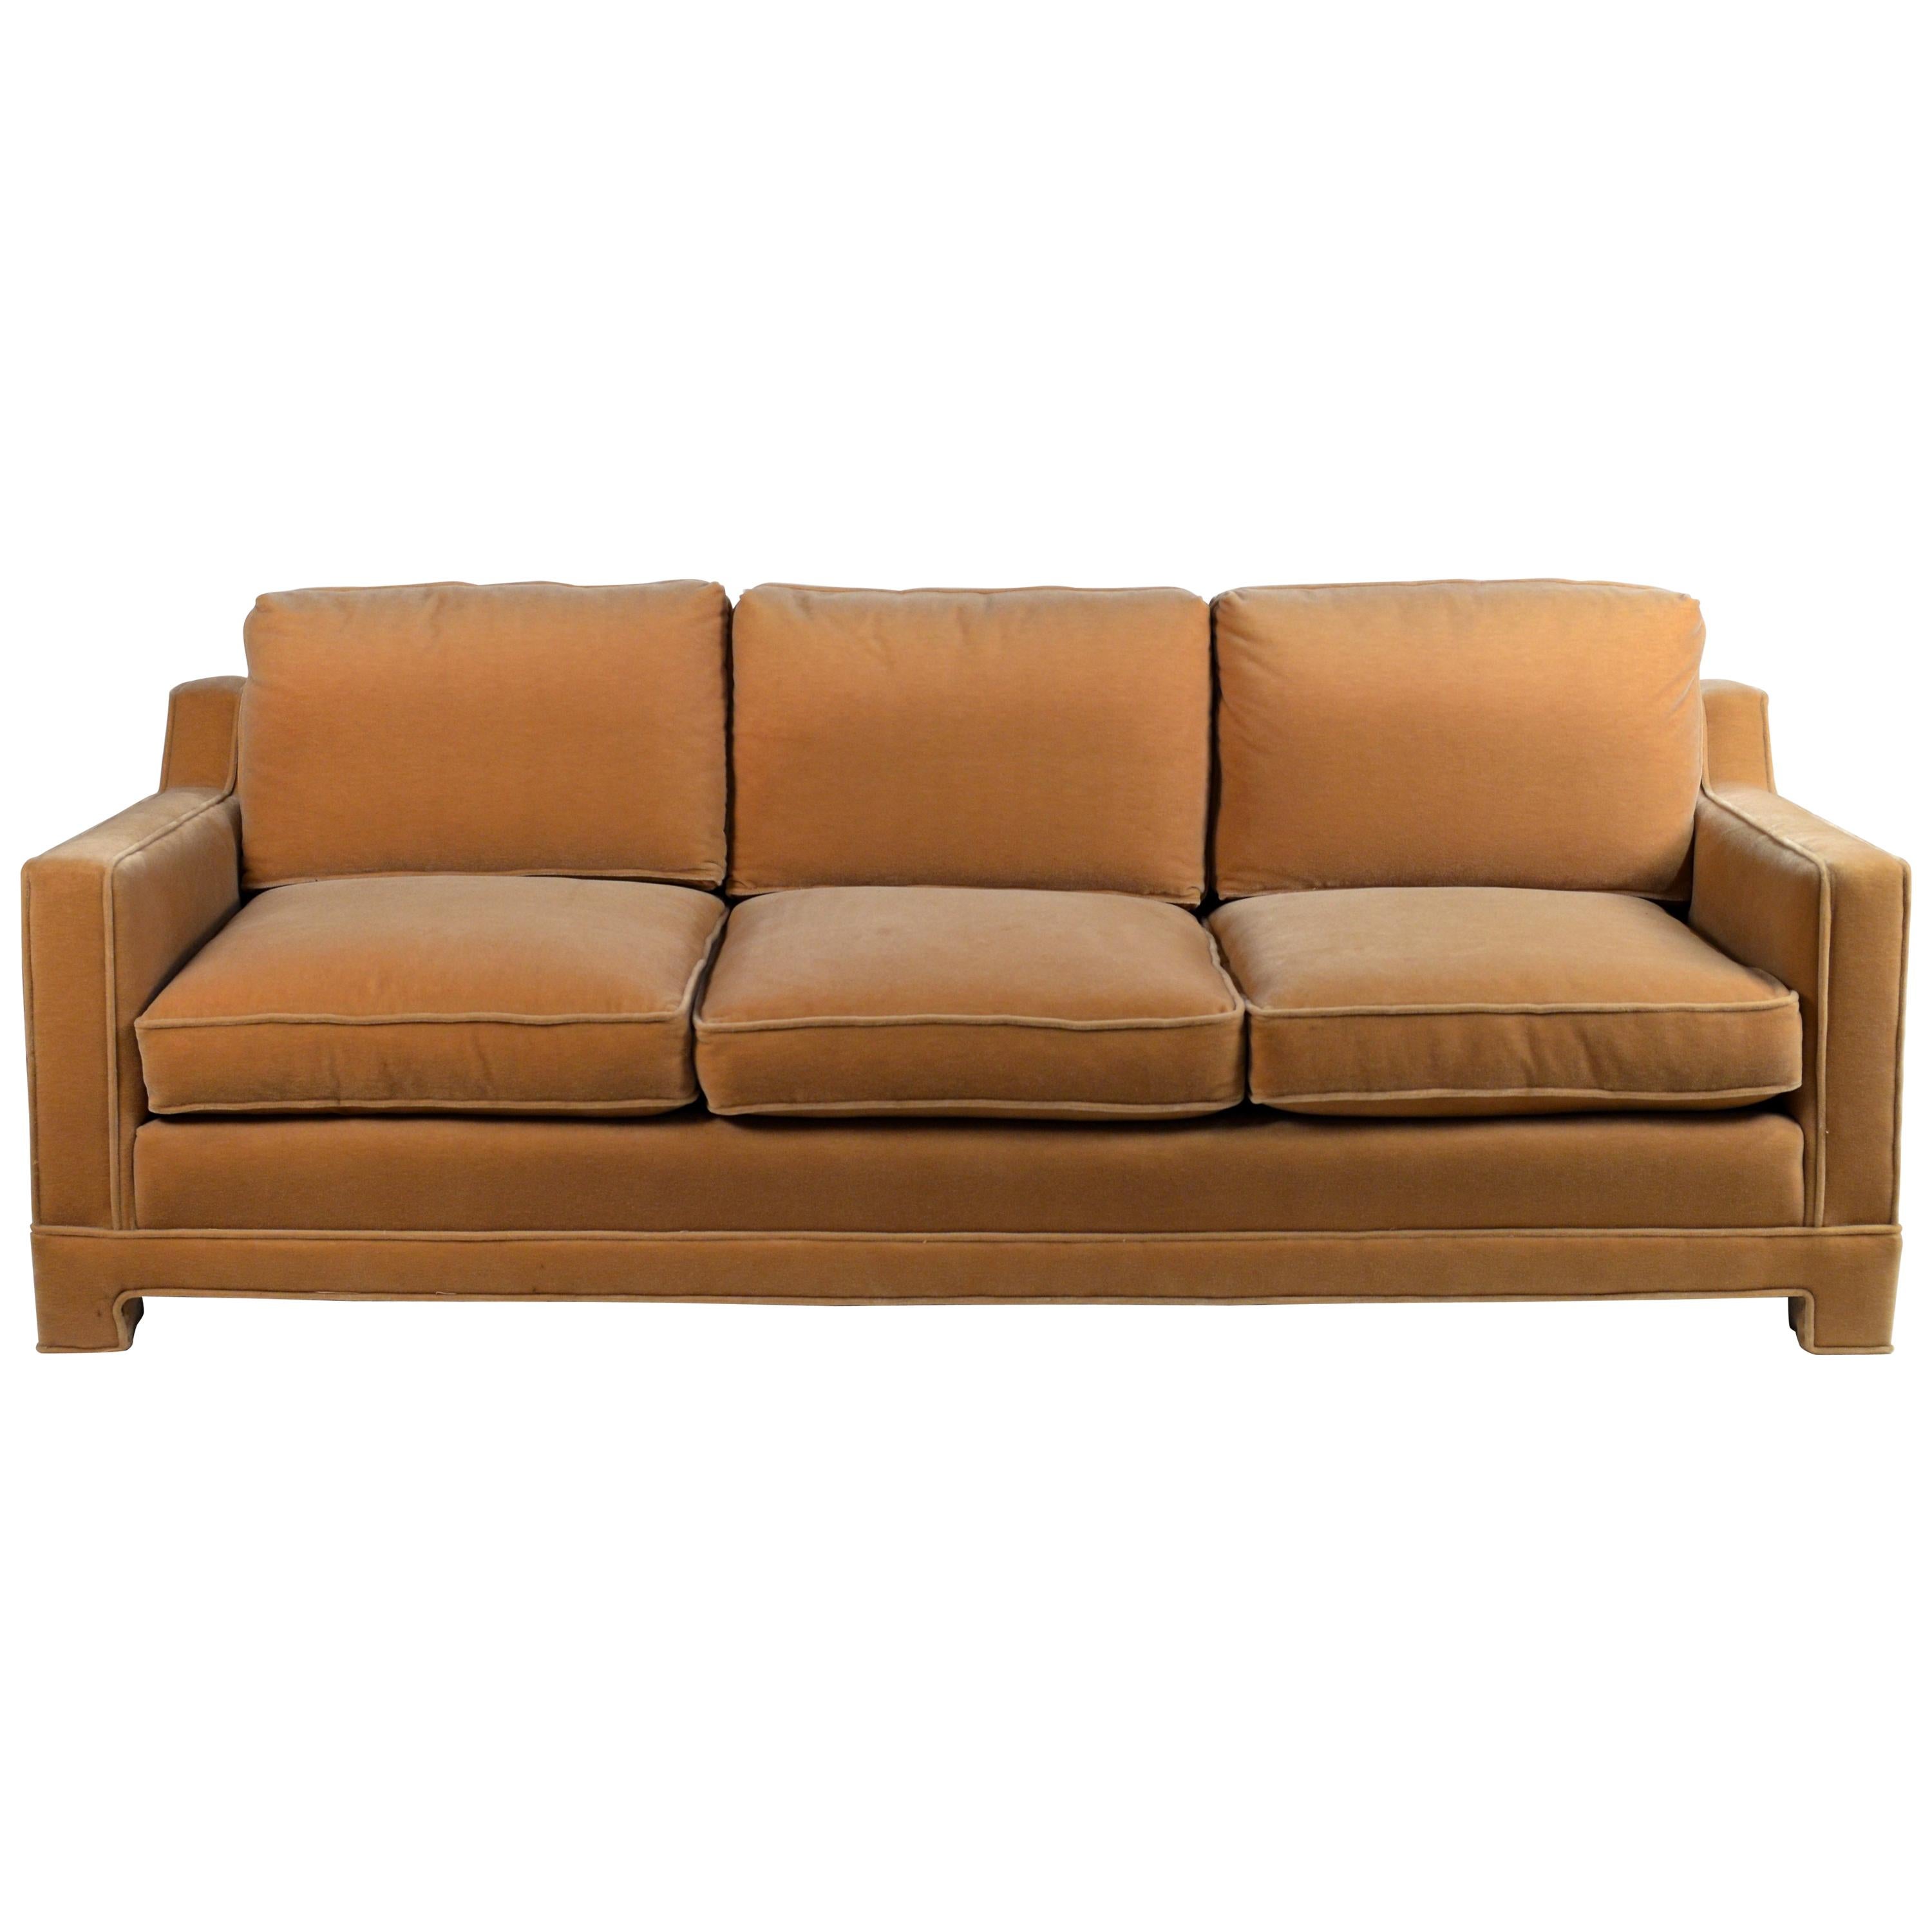 The 'Verneuil' Mohair Sofa by Design Frères For Sale